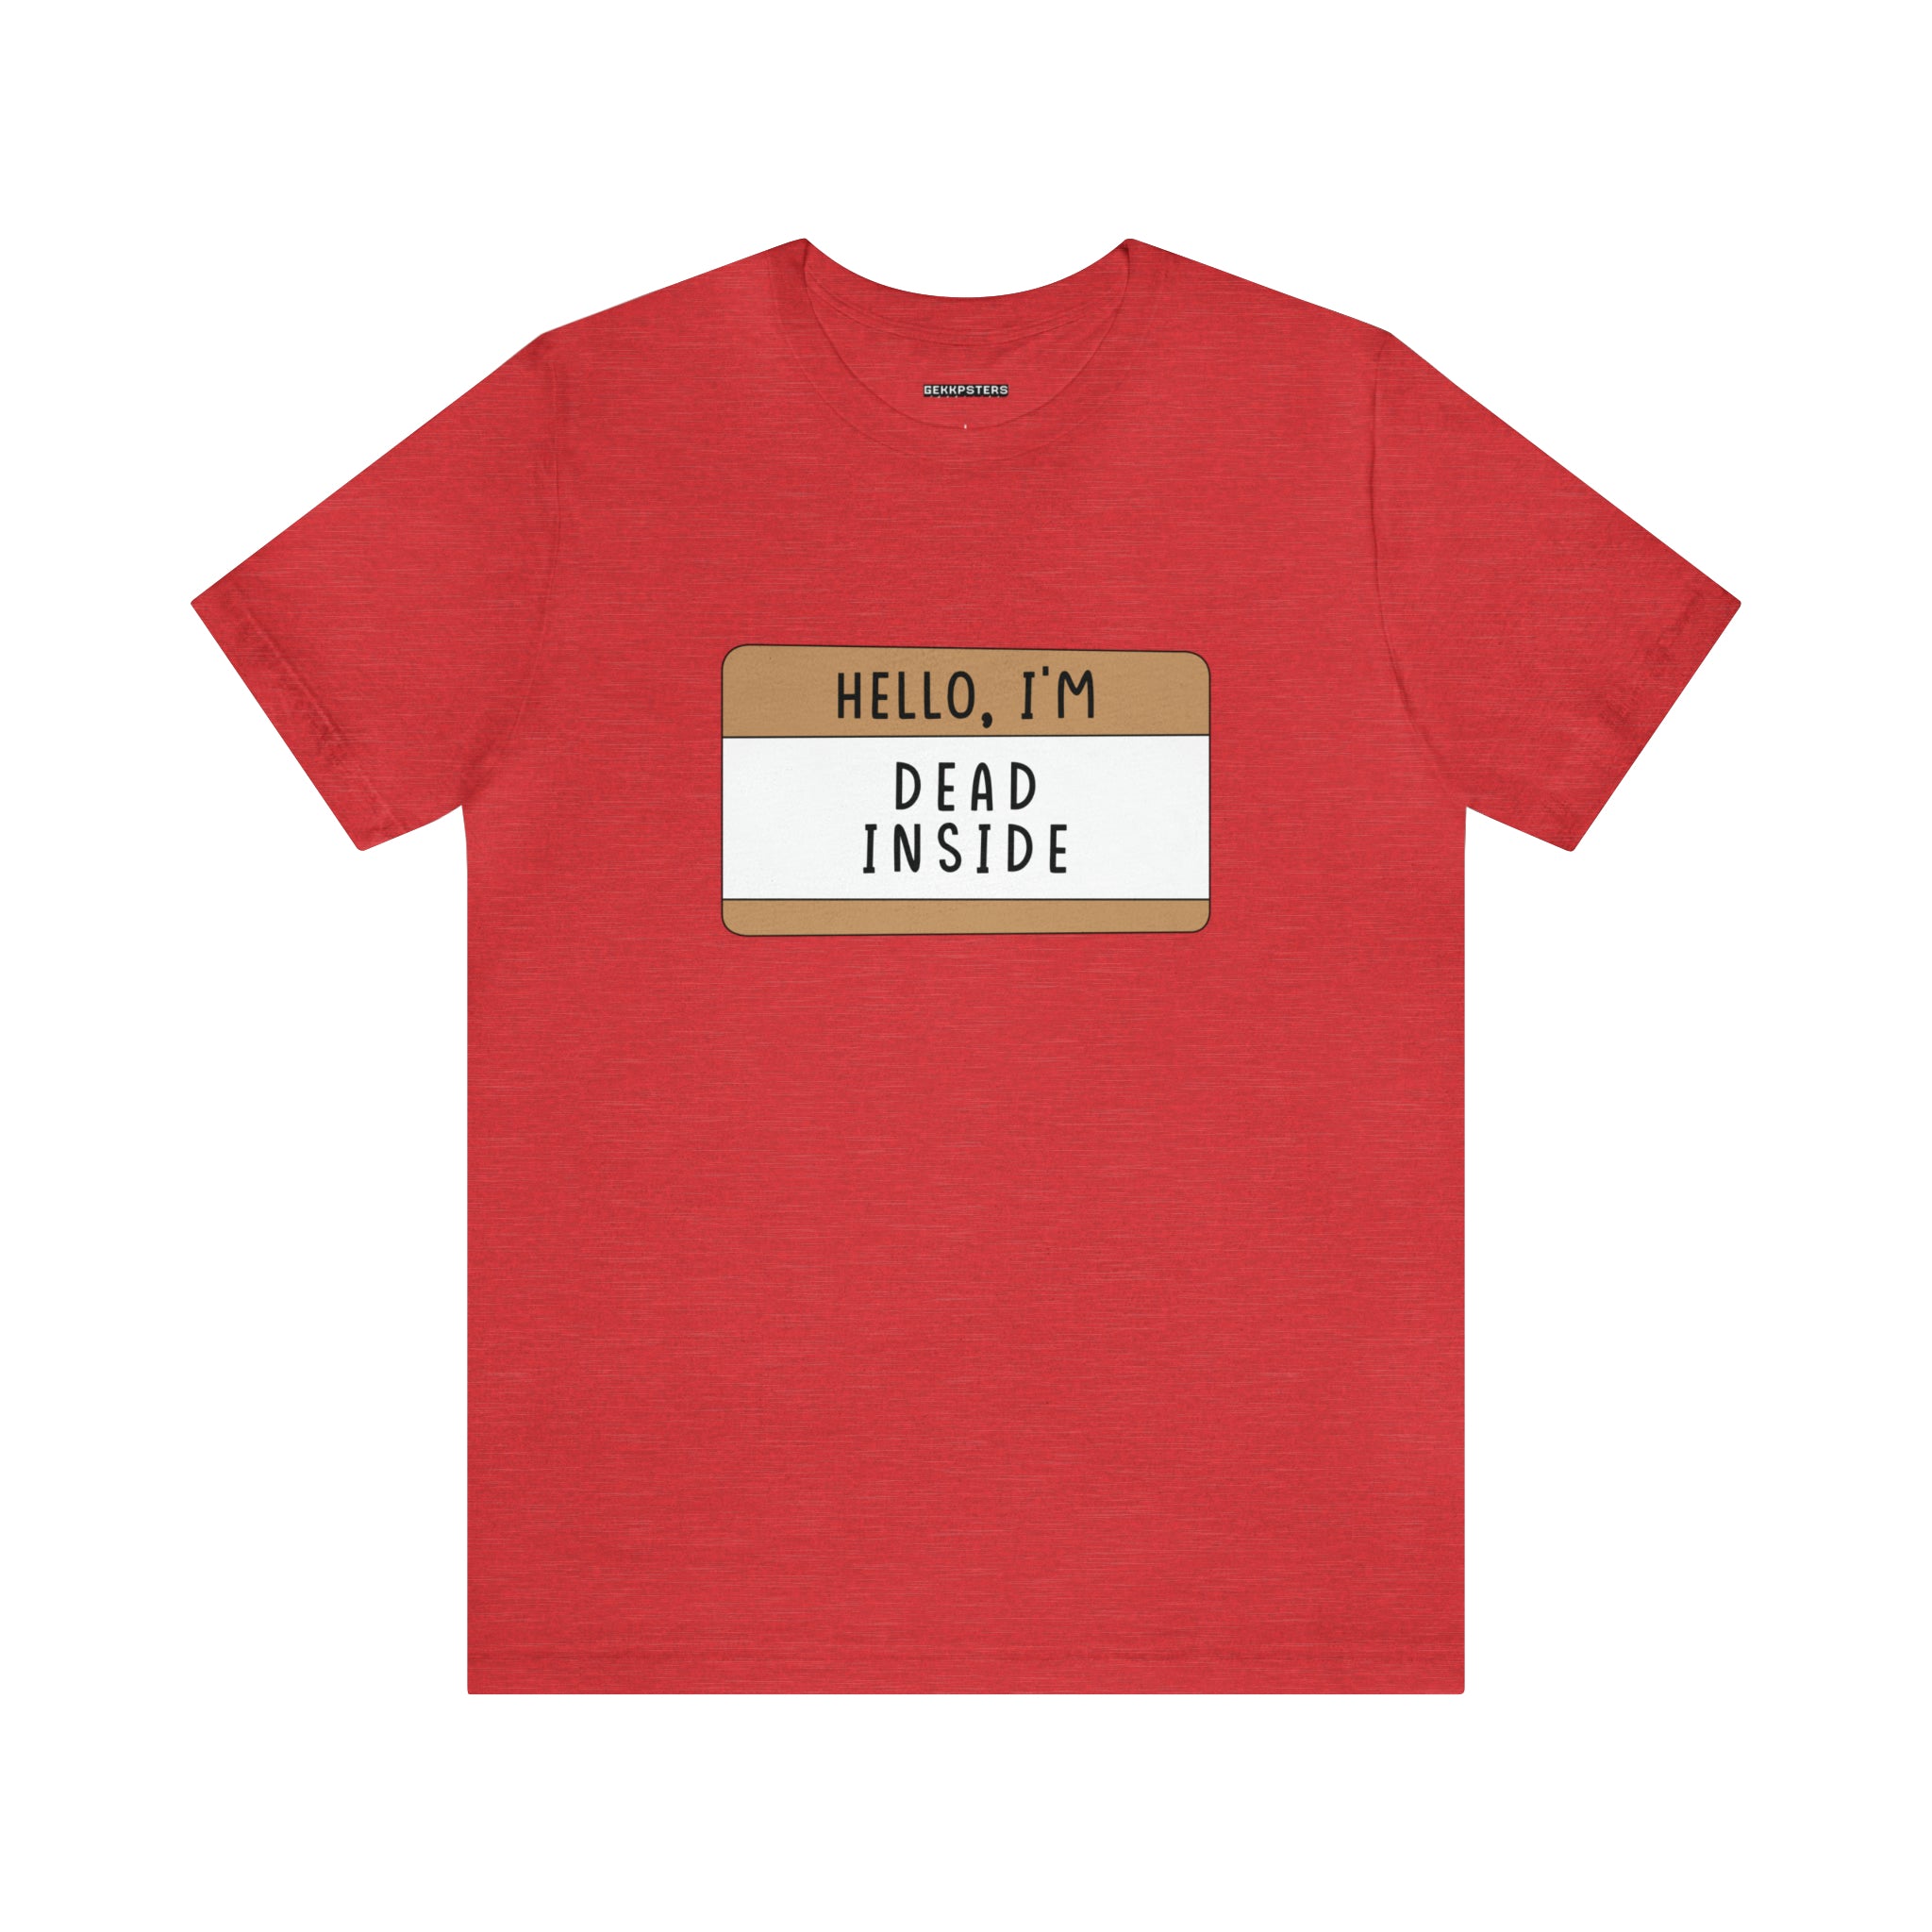 Hello, I'm Dead Inside T-Shirt with a quirky design featuring a name tag graphic that reads "hello, i'm dead inside" on the chest area.